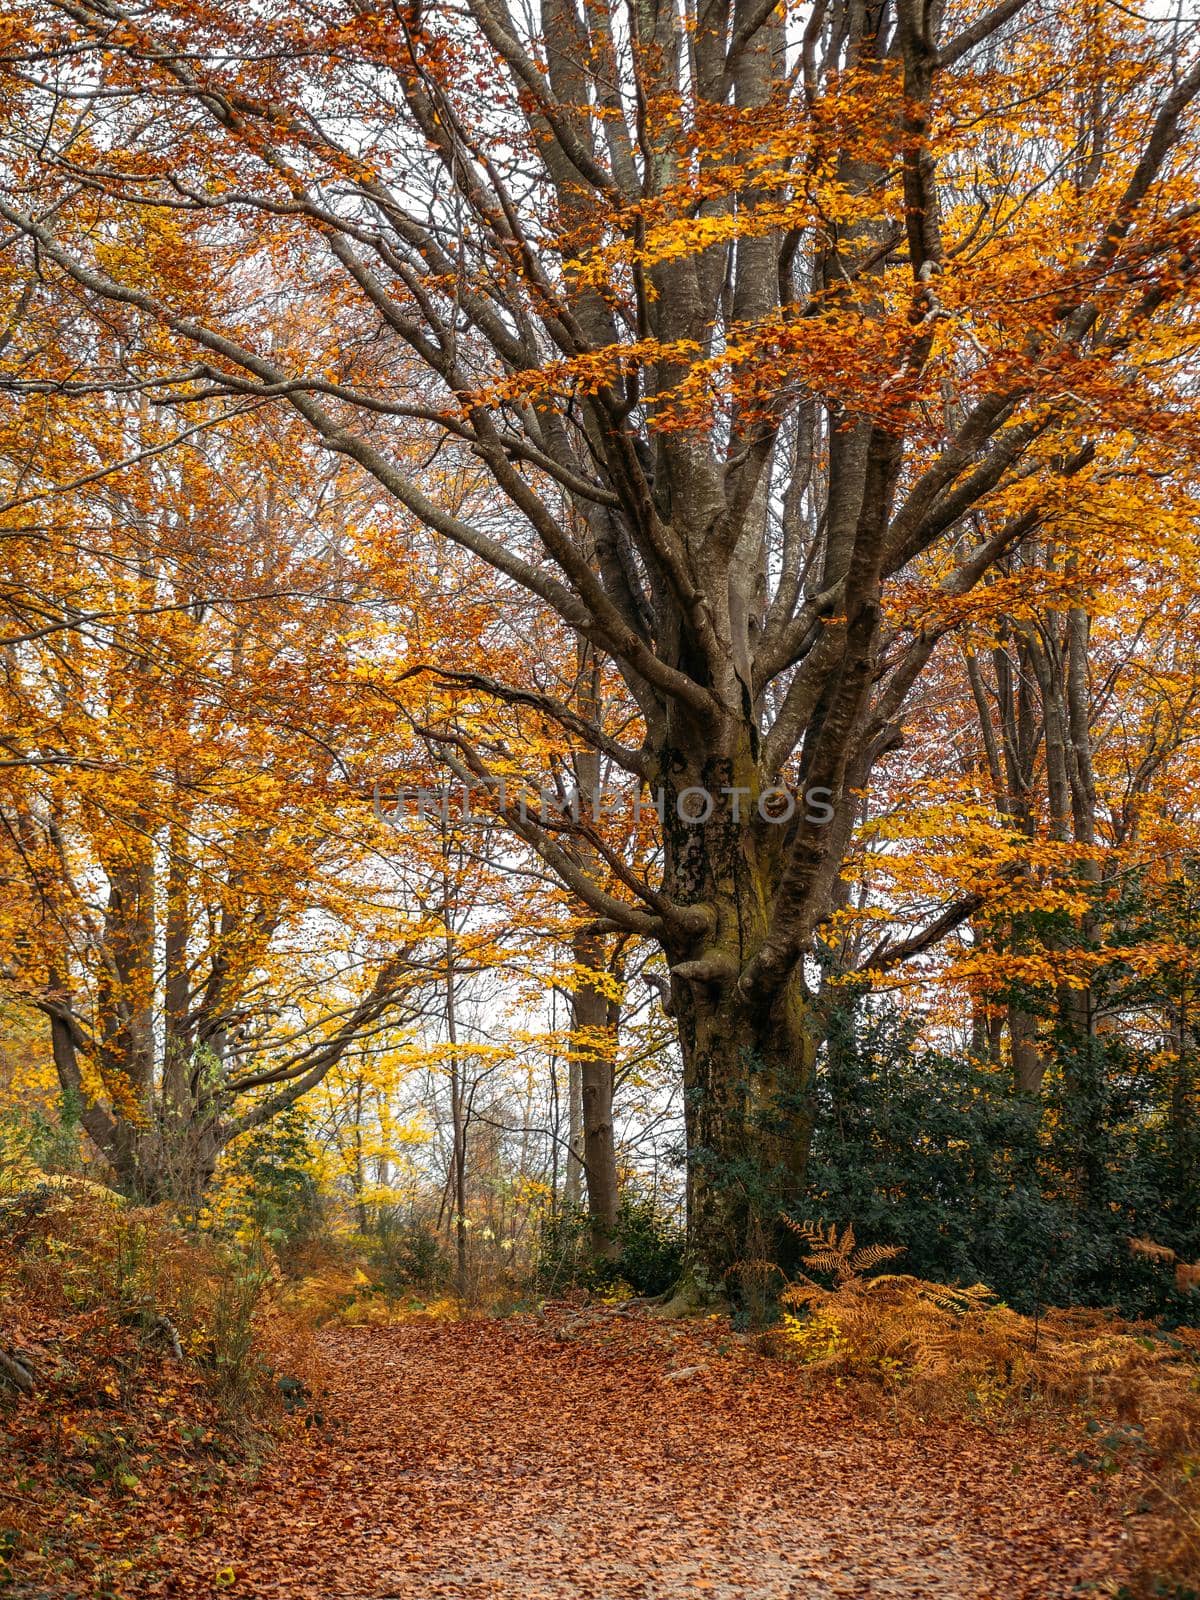 Big yellow tree with wood fences near the road. Pathway through in the forest at autumn landscape.